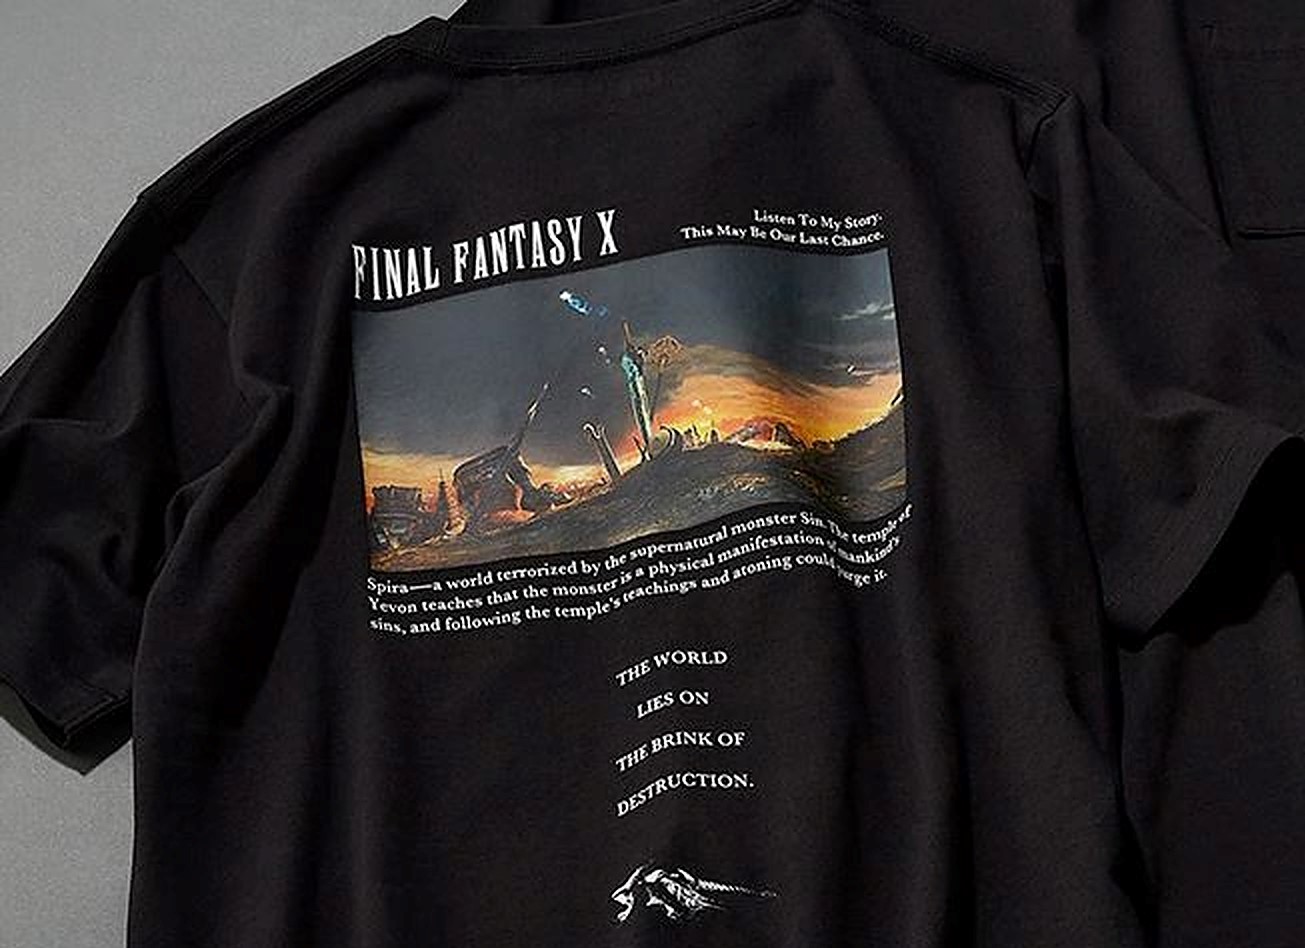 Uniqlo's Final Fantasy Anniversary T-Shirt Designs Are Trying Way